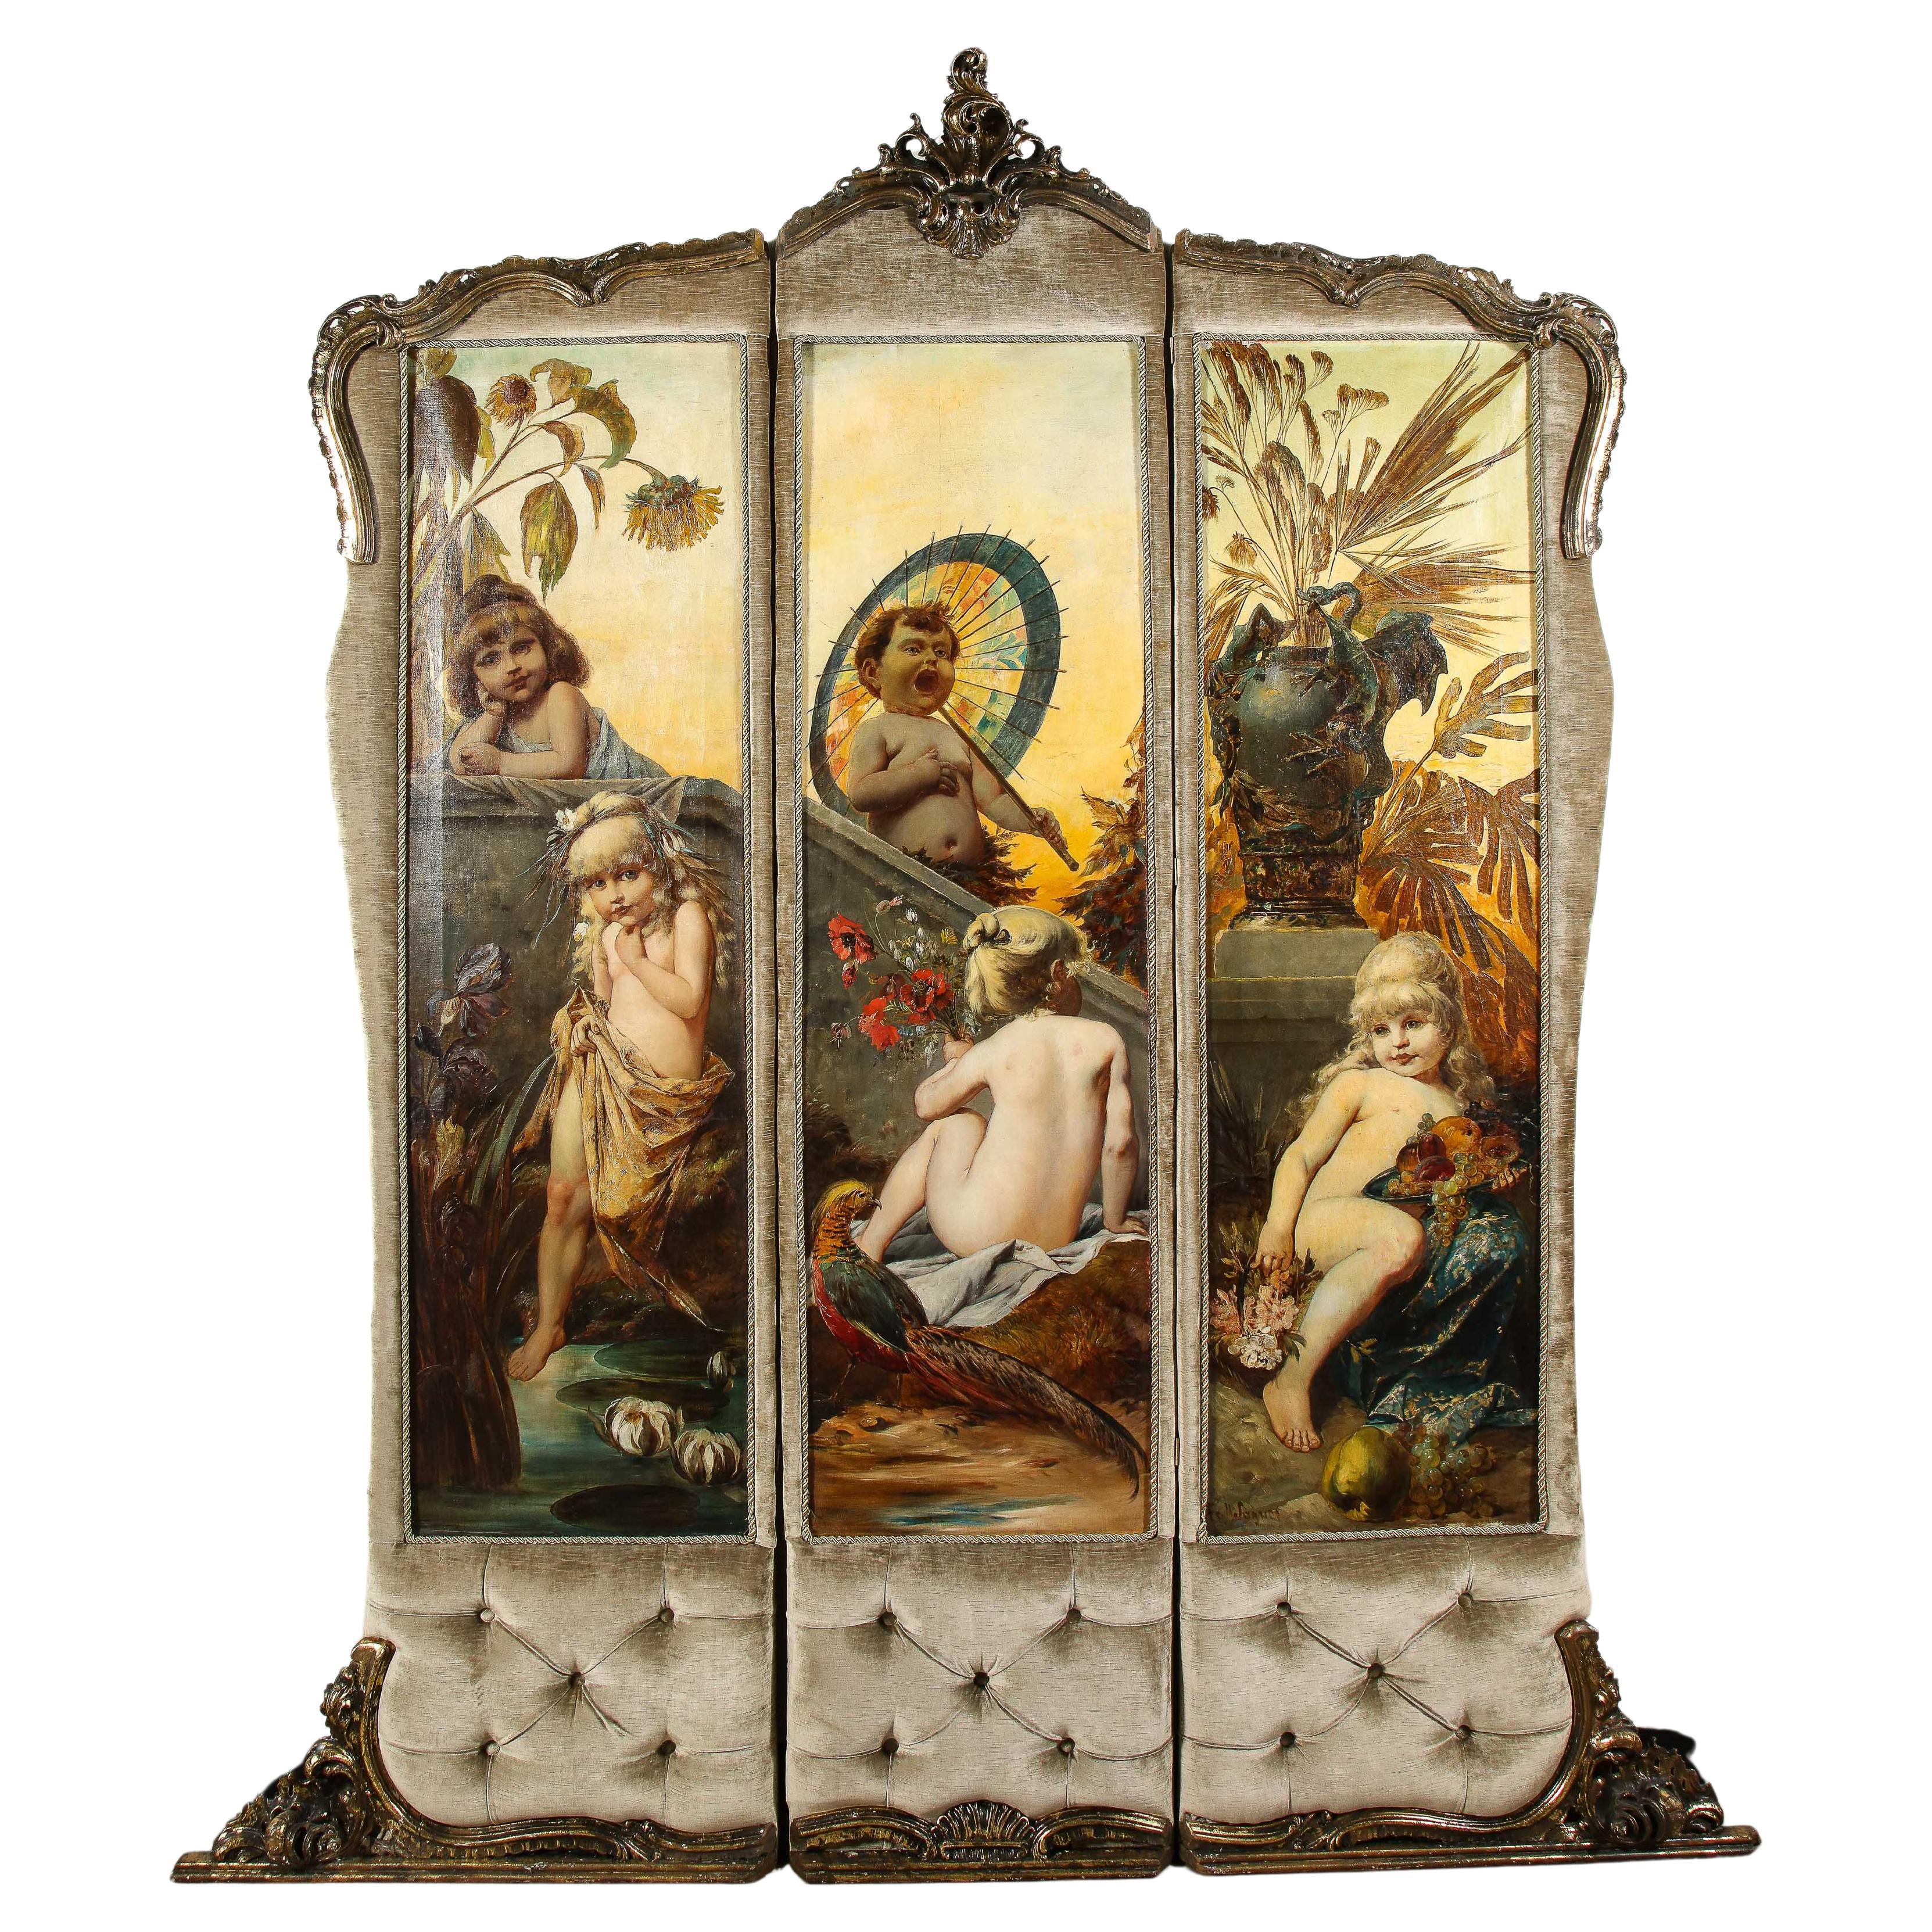 Palatial and Opulent Belle Epoque Giltwood & Oil on Canvas Three-Panel Screen